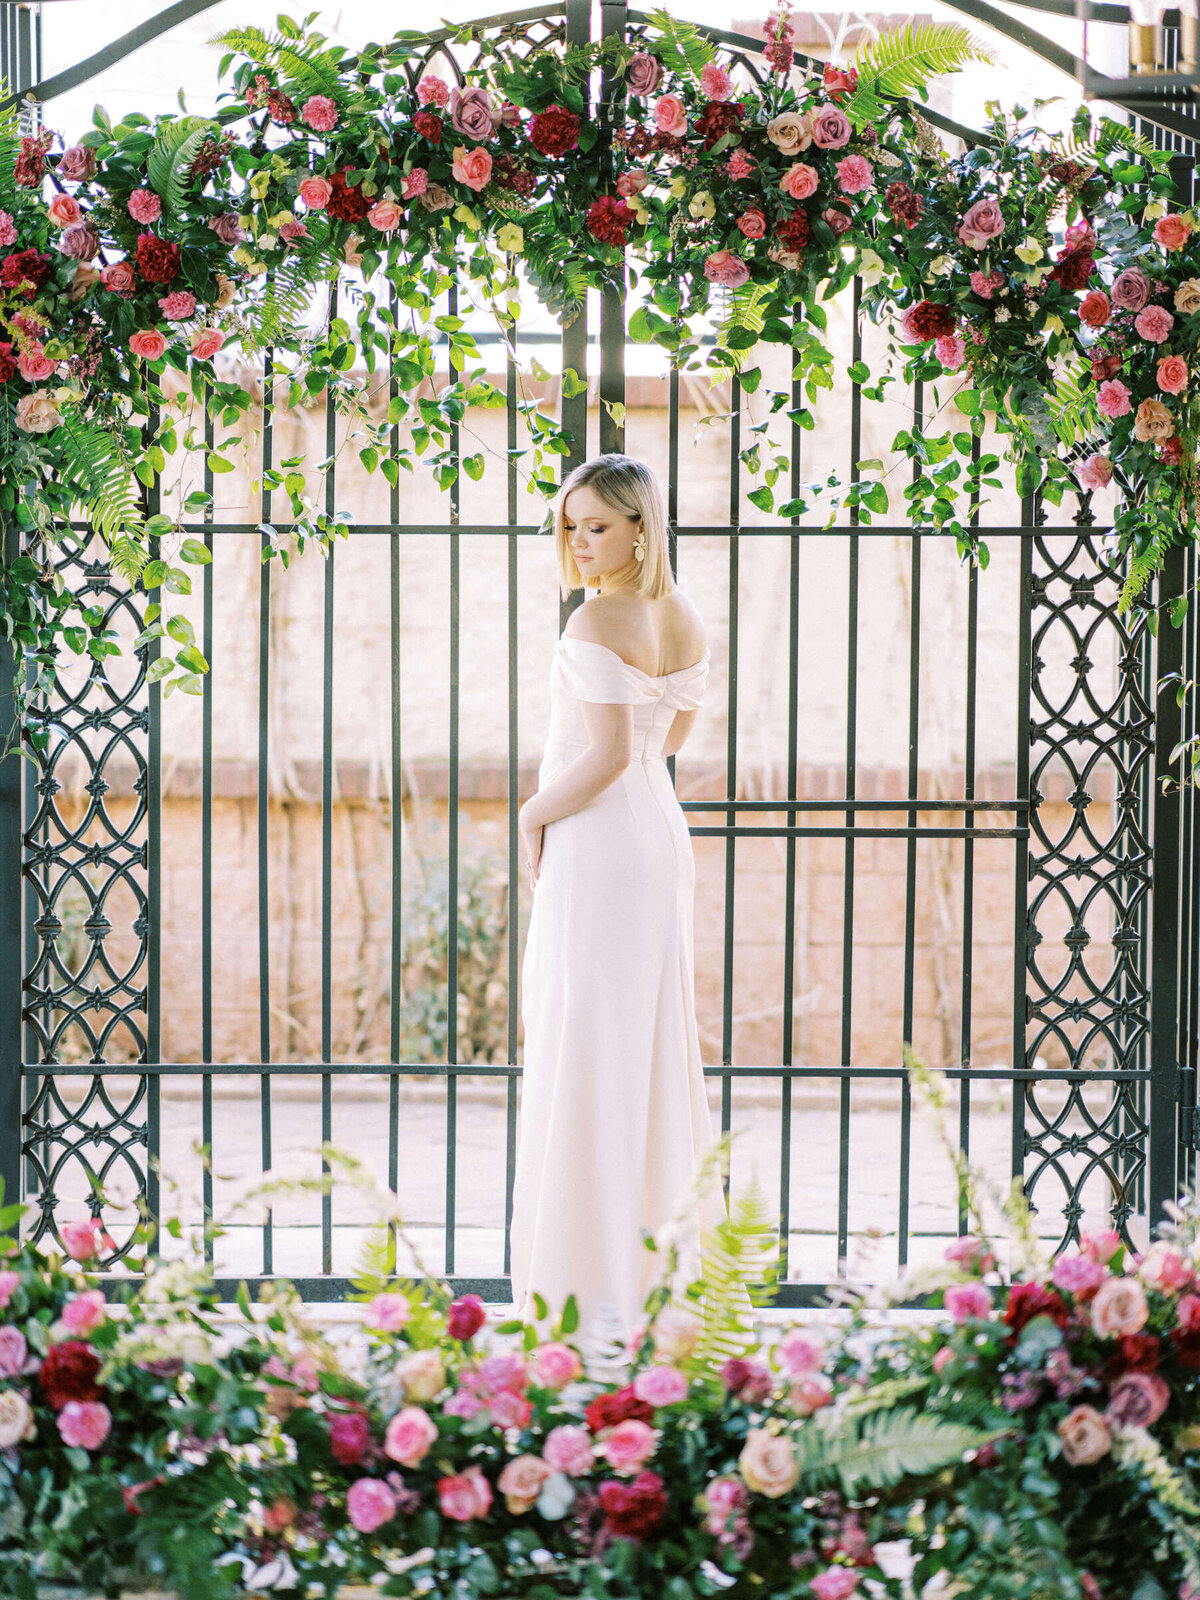 02 Roots Venue Fort Worth Texas Styled Bridal Session Shoot Kate Panza Photography